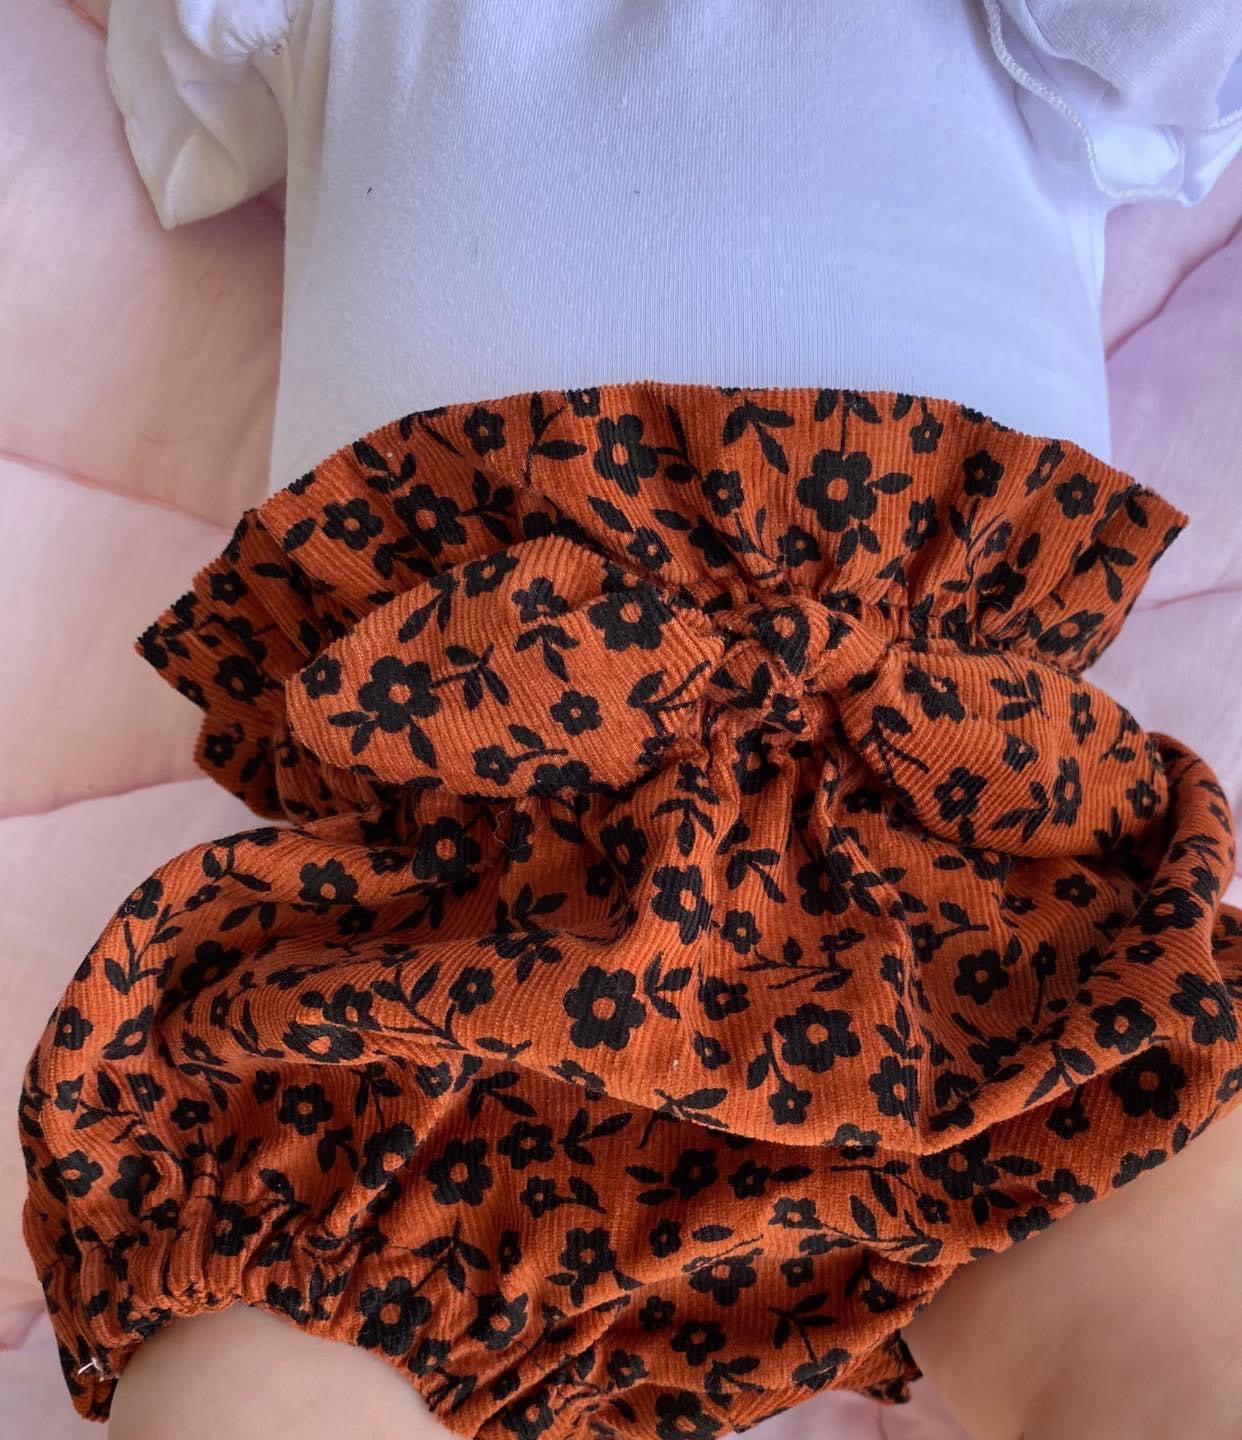 Thin corduroy floral bloomers w/ bow